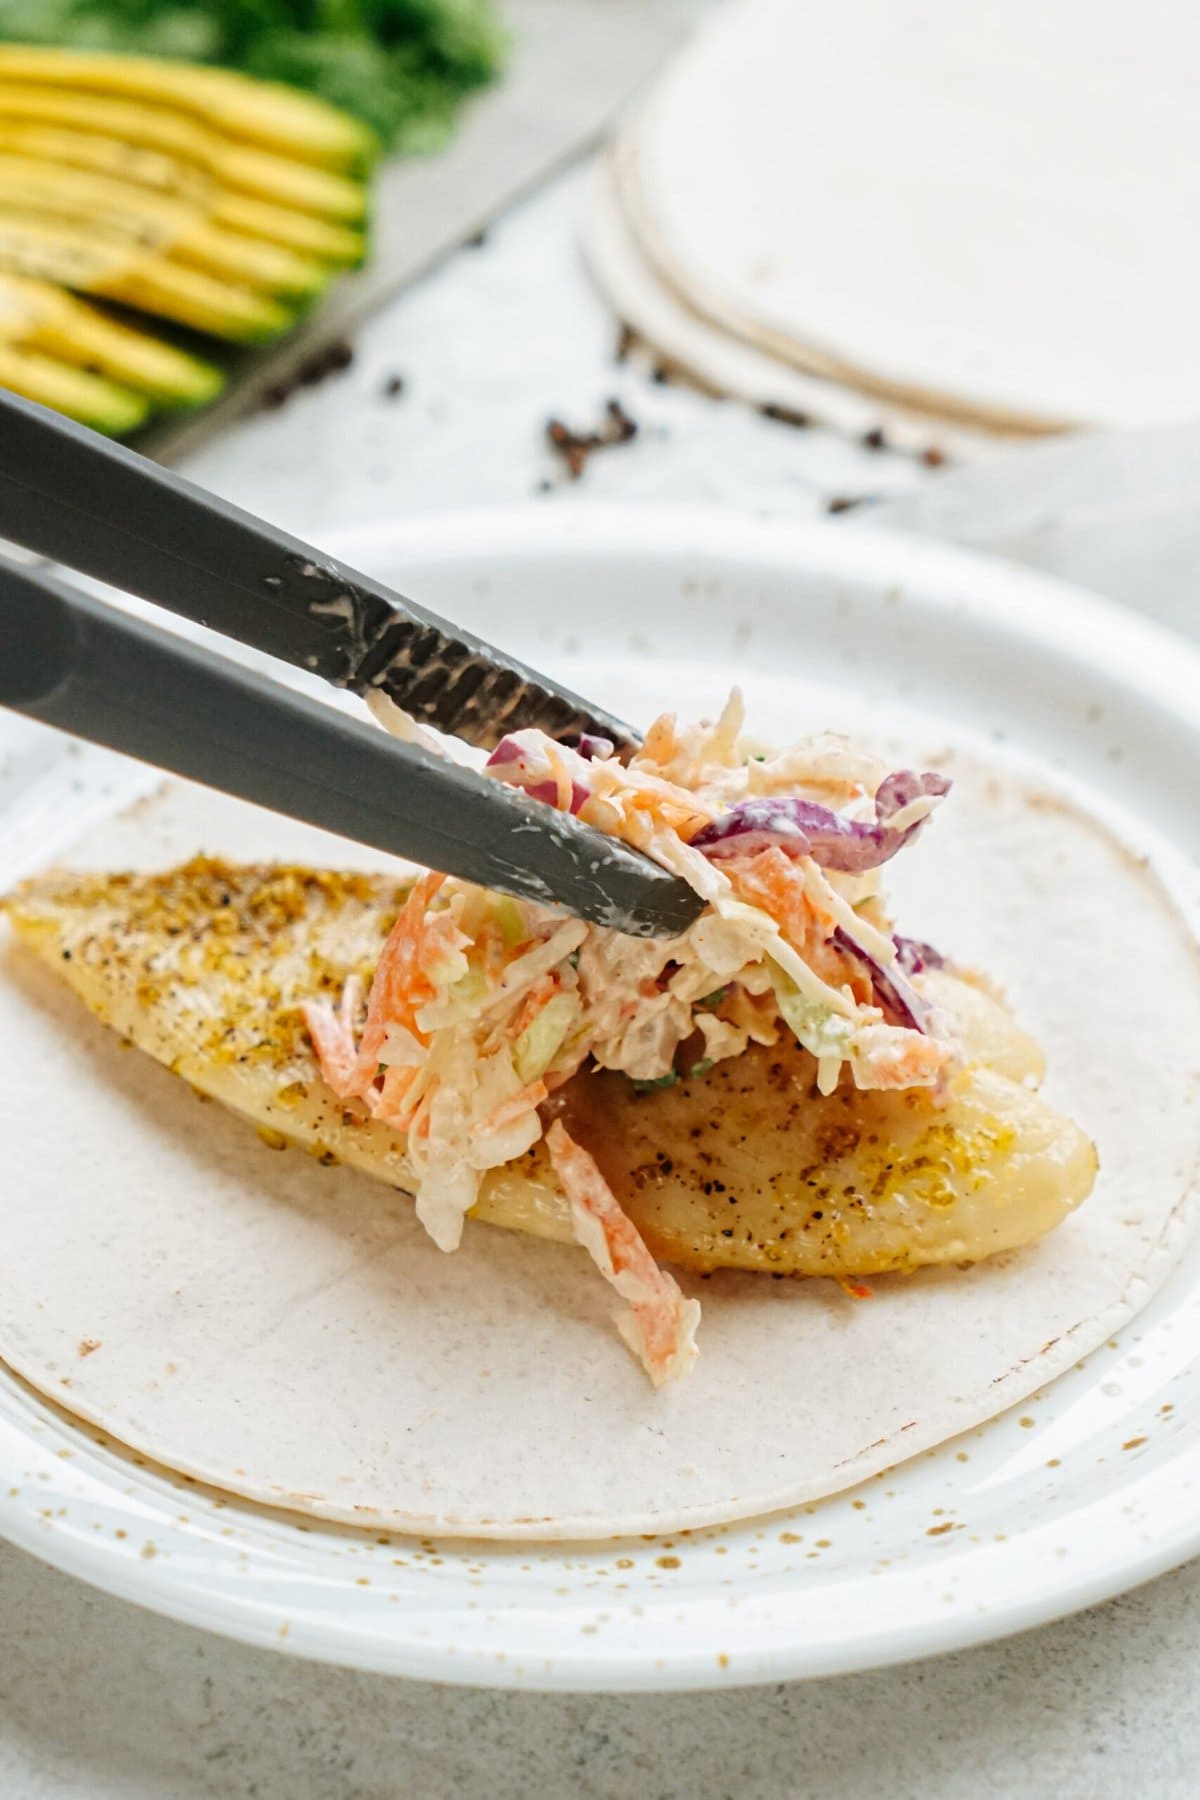 Tongs placing coleslaw on top of a seasoned, grilled fish taco fillet on a plate.